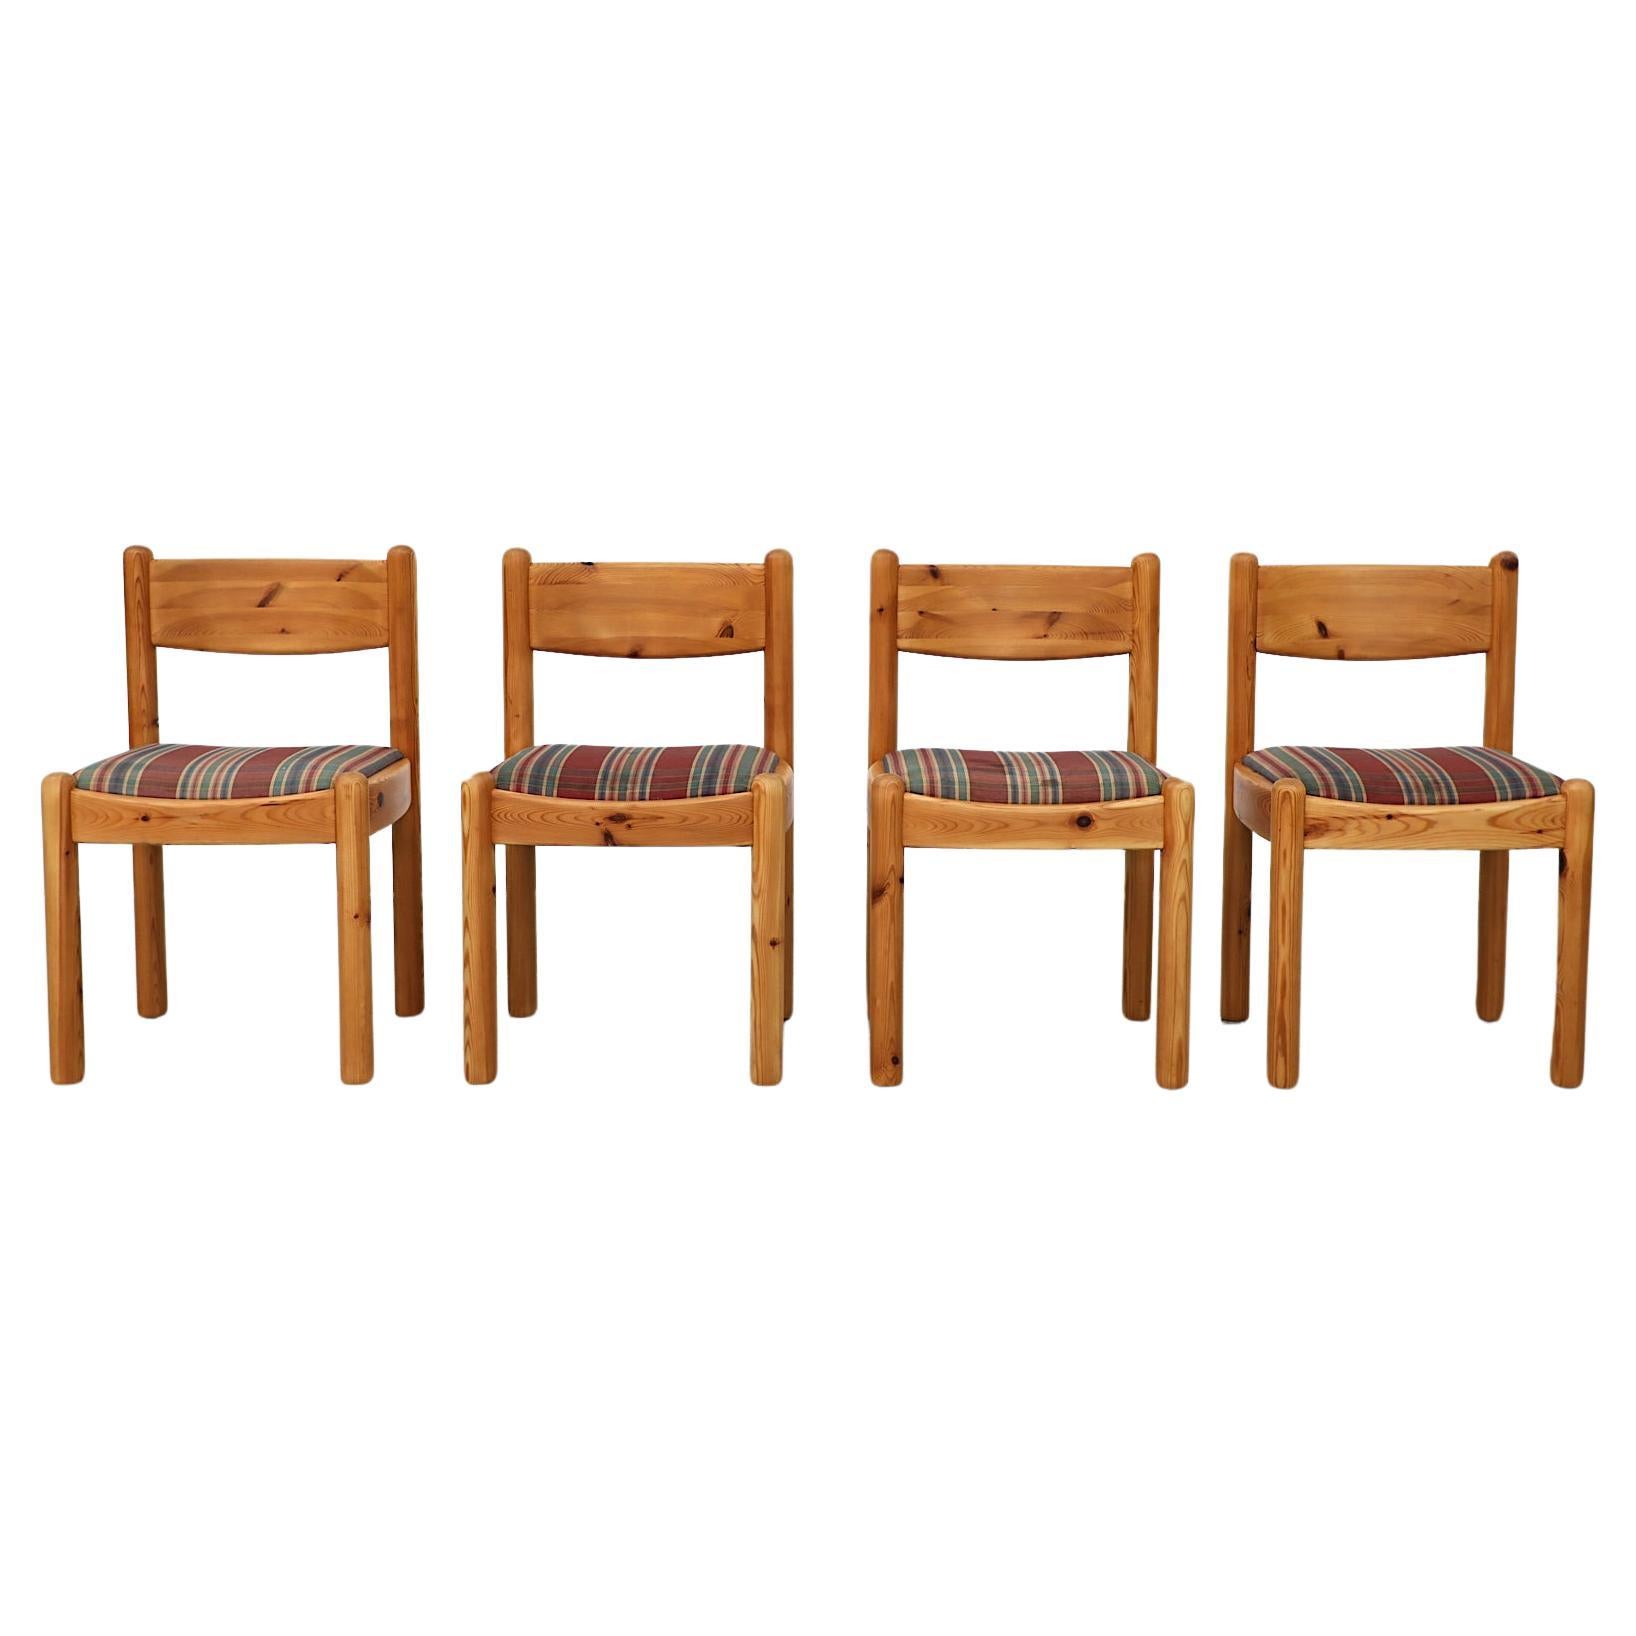 Set of 4 Ate van Apeldoorn Style Pine Dining Chairs with Plaid Seats For Sale